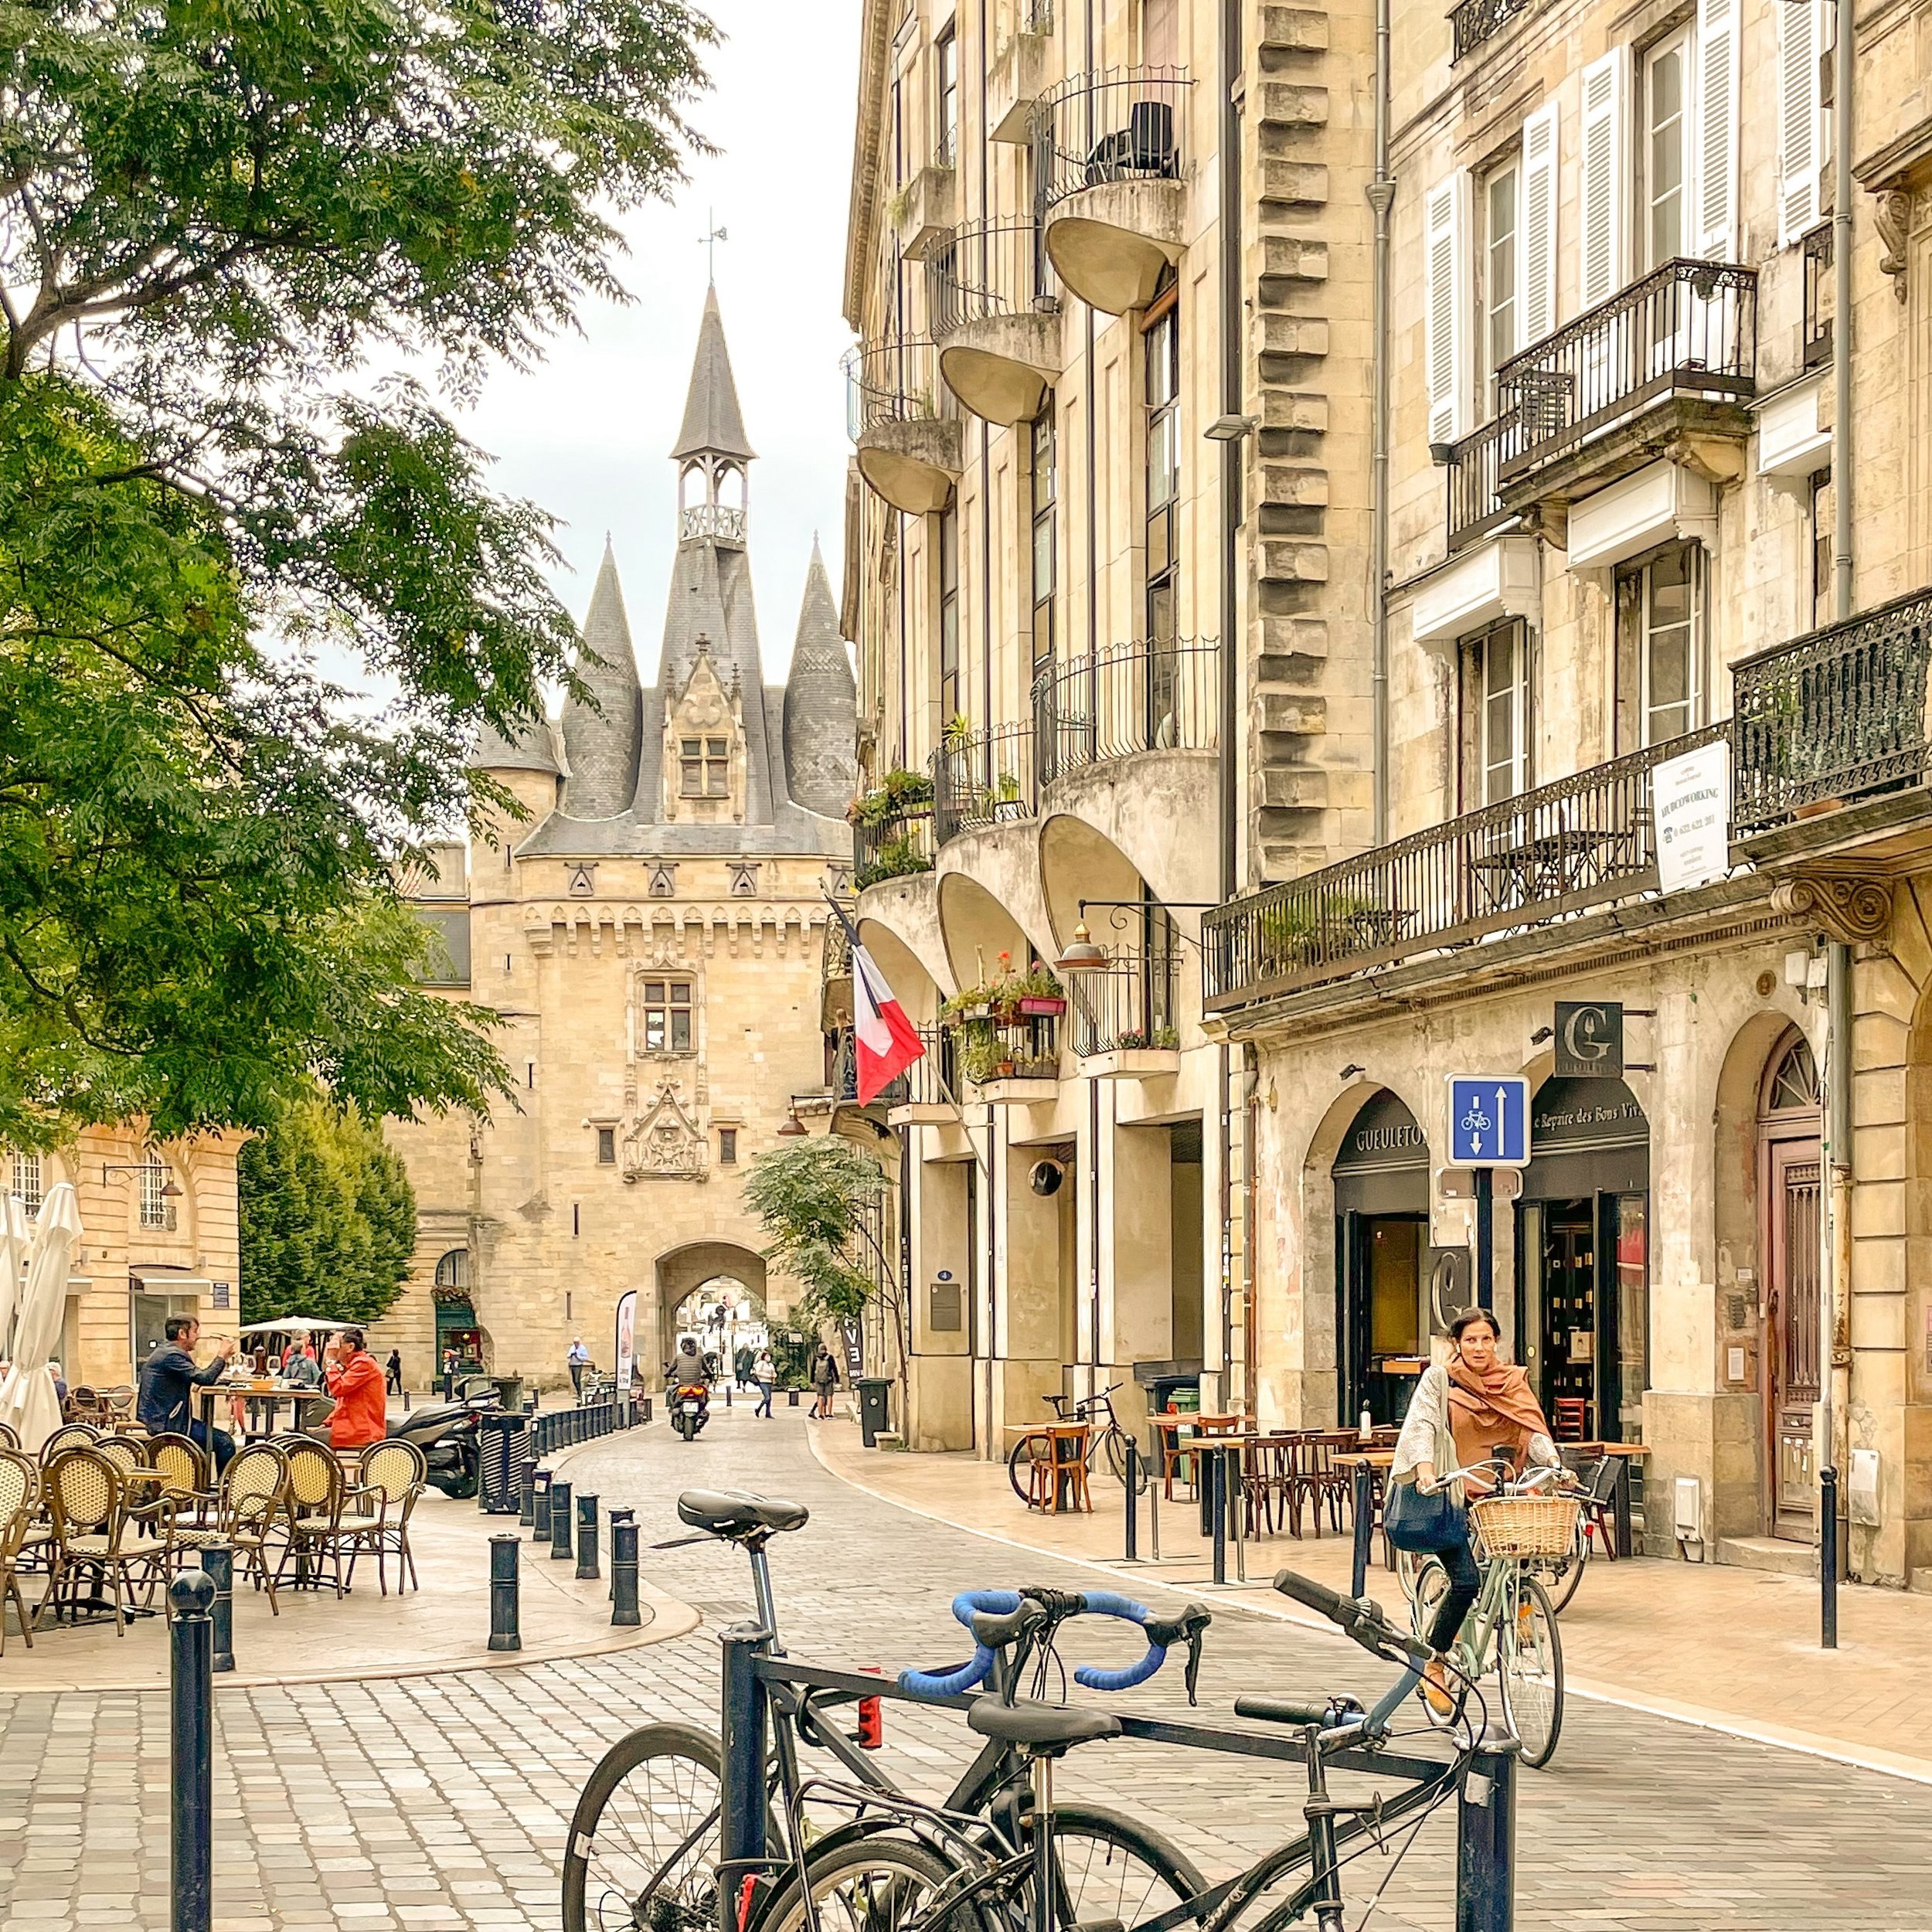 Bordeaux is such an idyllic city to wander around or bike through in the southwest of France with pretty castle like buildings and winding stone roads ~ along with so many nearby vineyards and chateaus to visit! 🍷

Definitely add Bordeaux to your tr